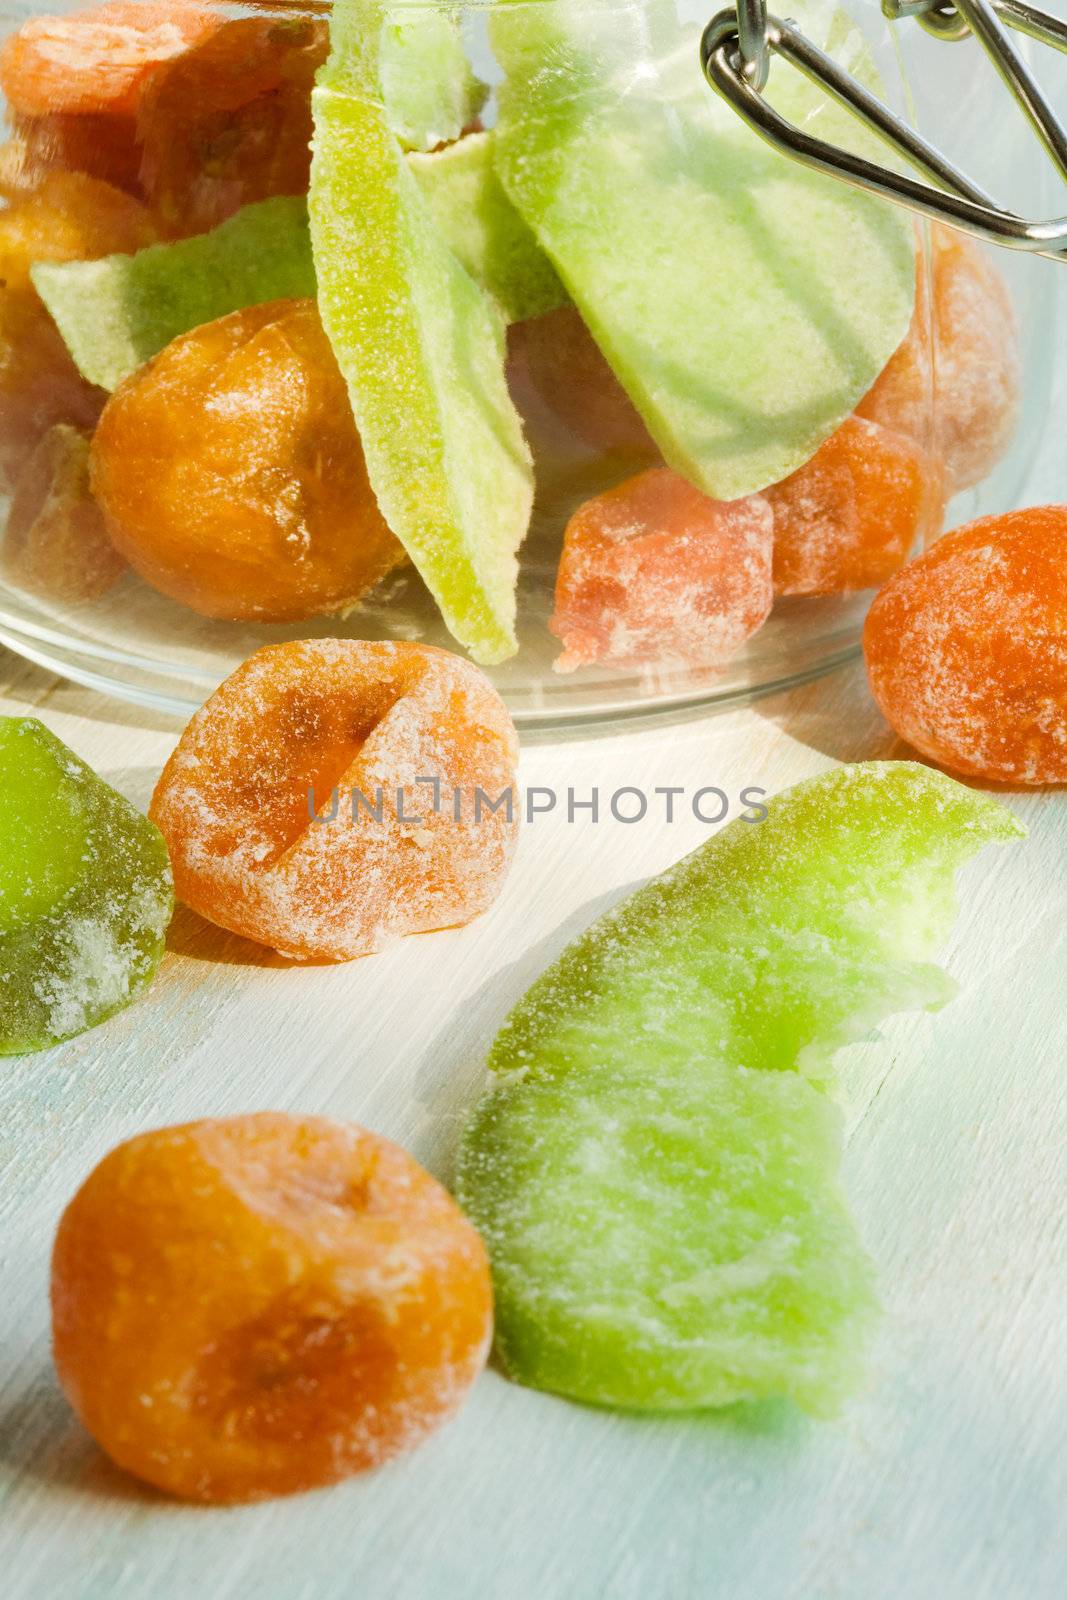 Dried fruits by Gravicapa